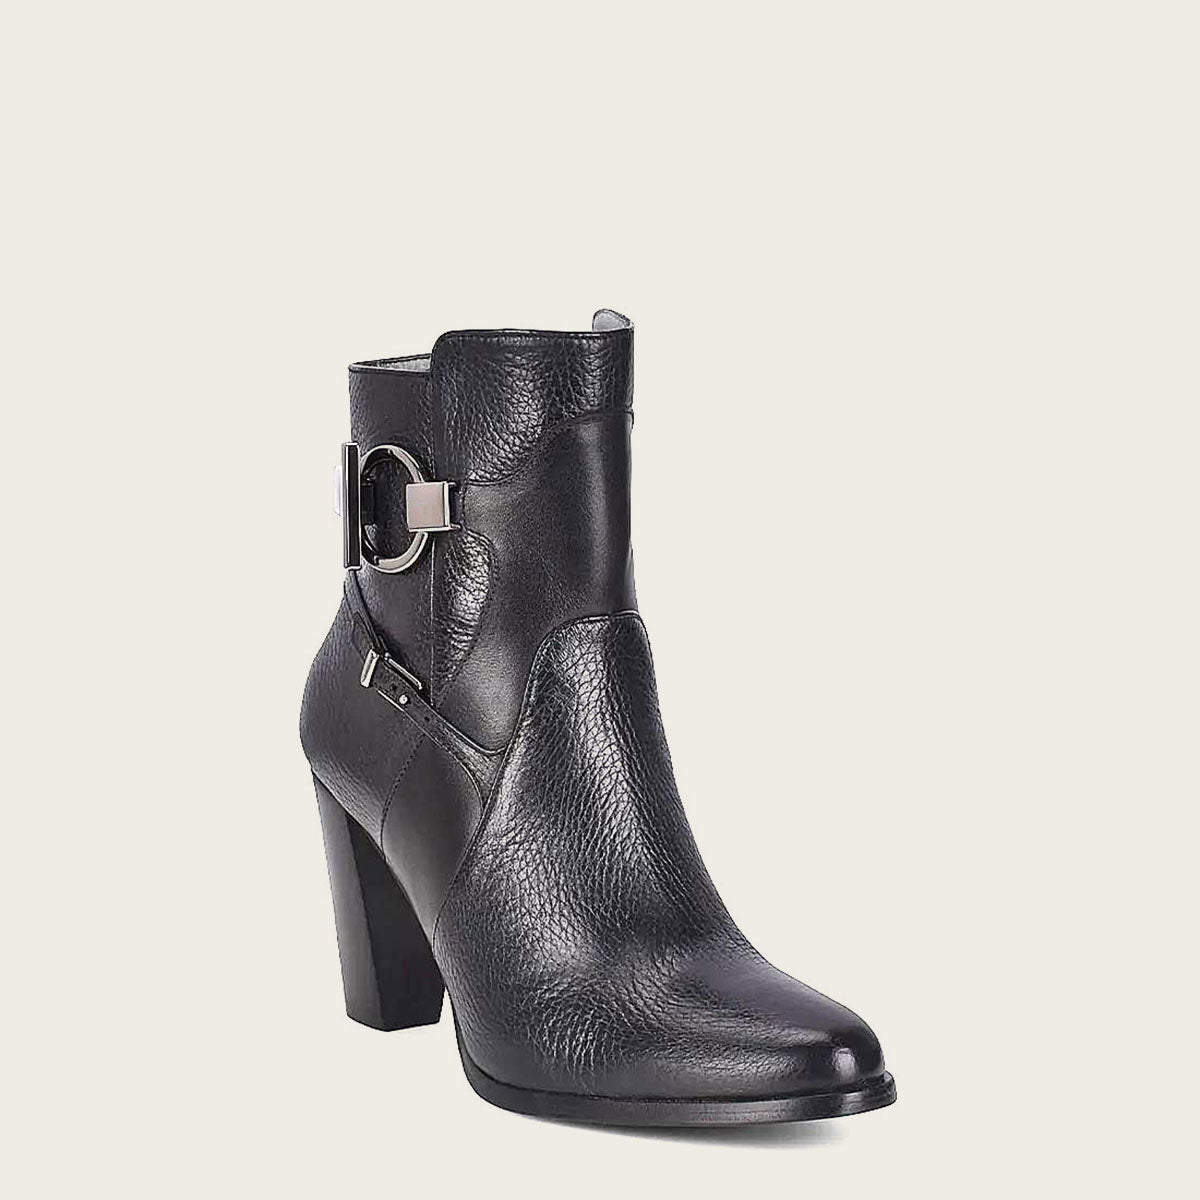 Black leather bootie made with genuine deer leather, featuring a sleek and stylish design.